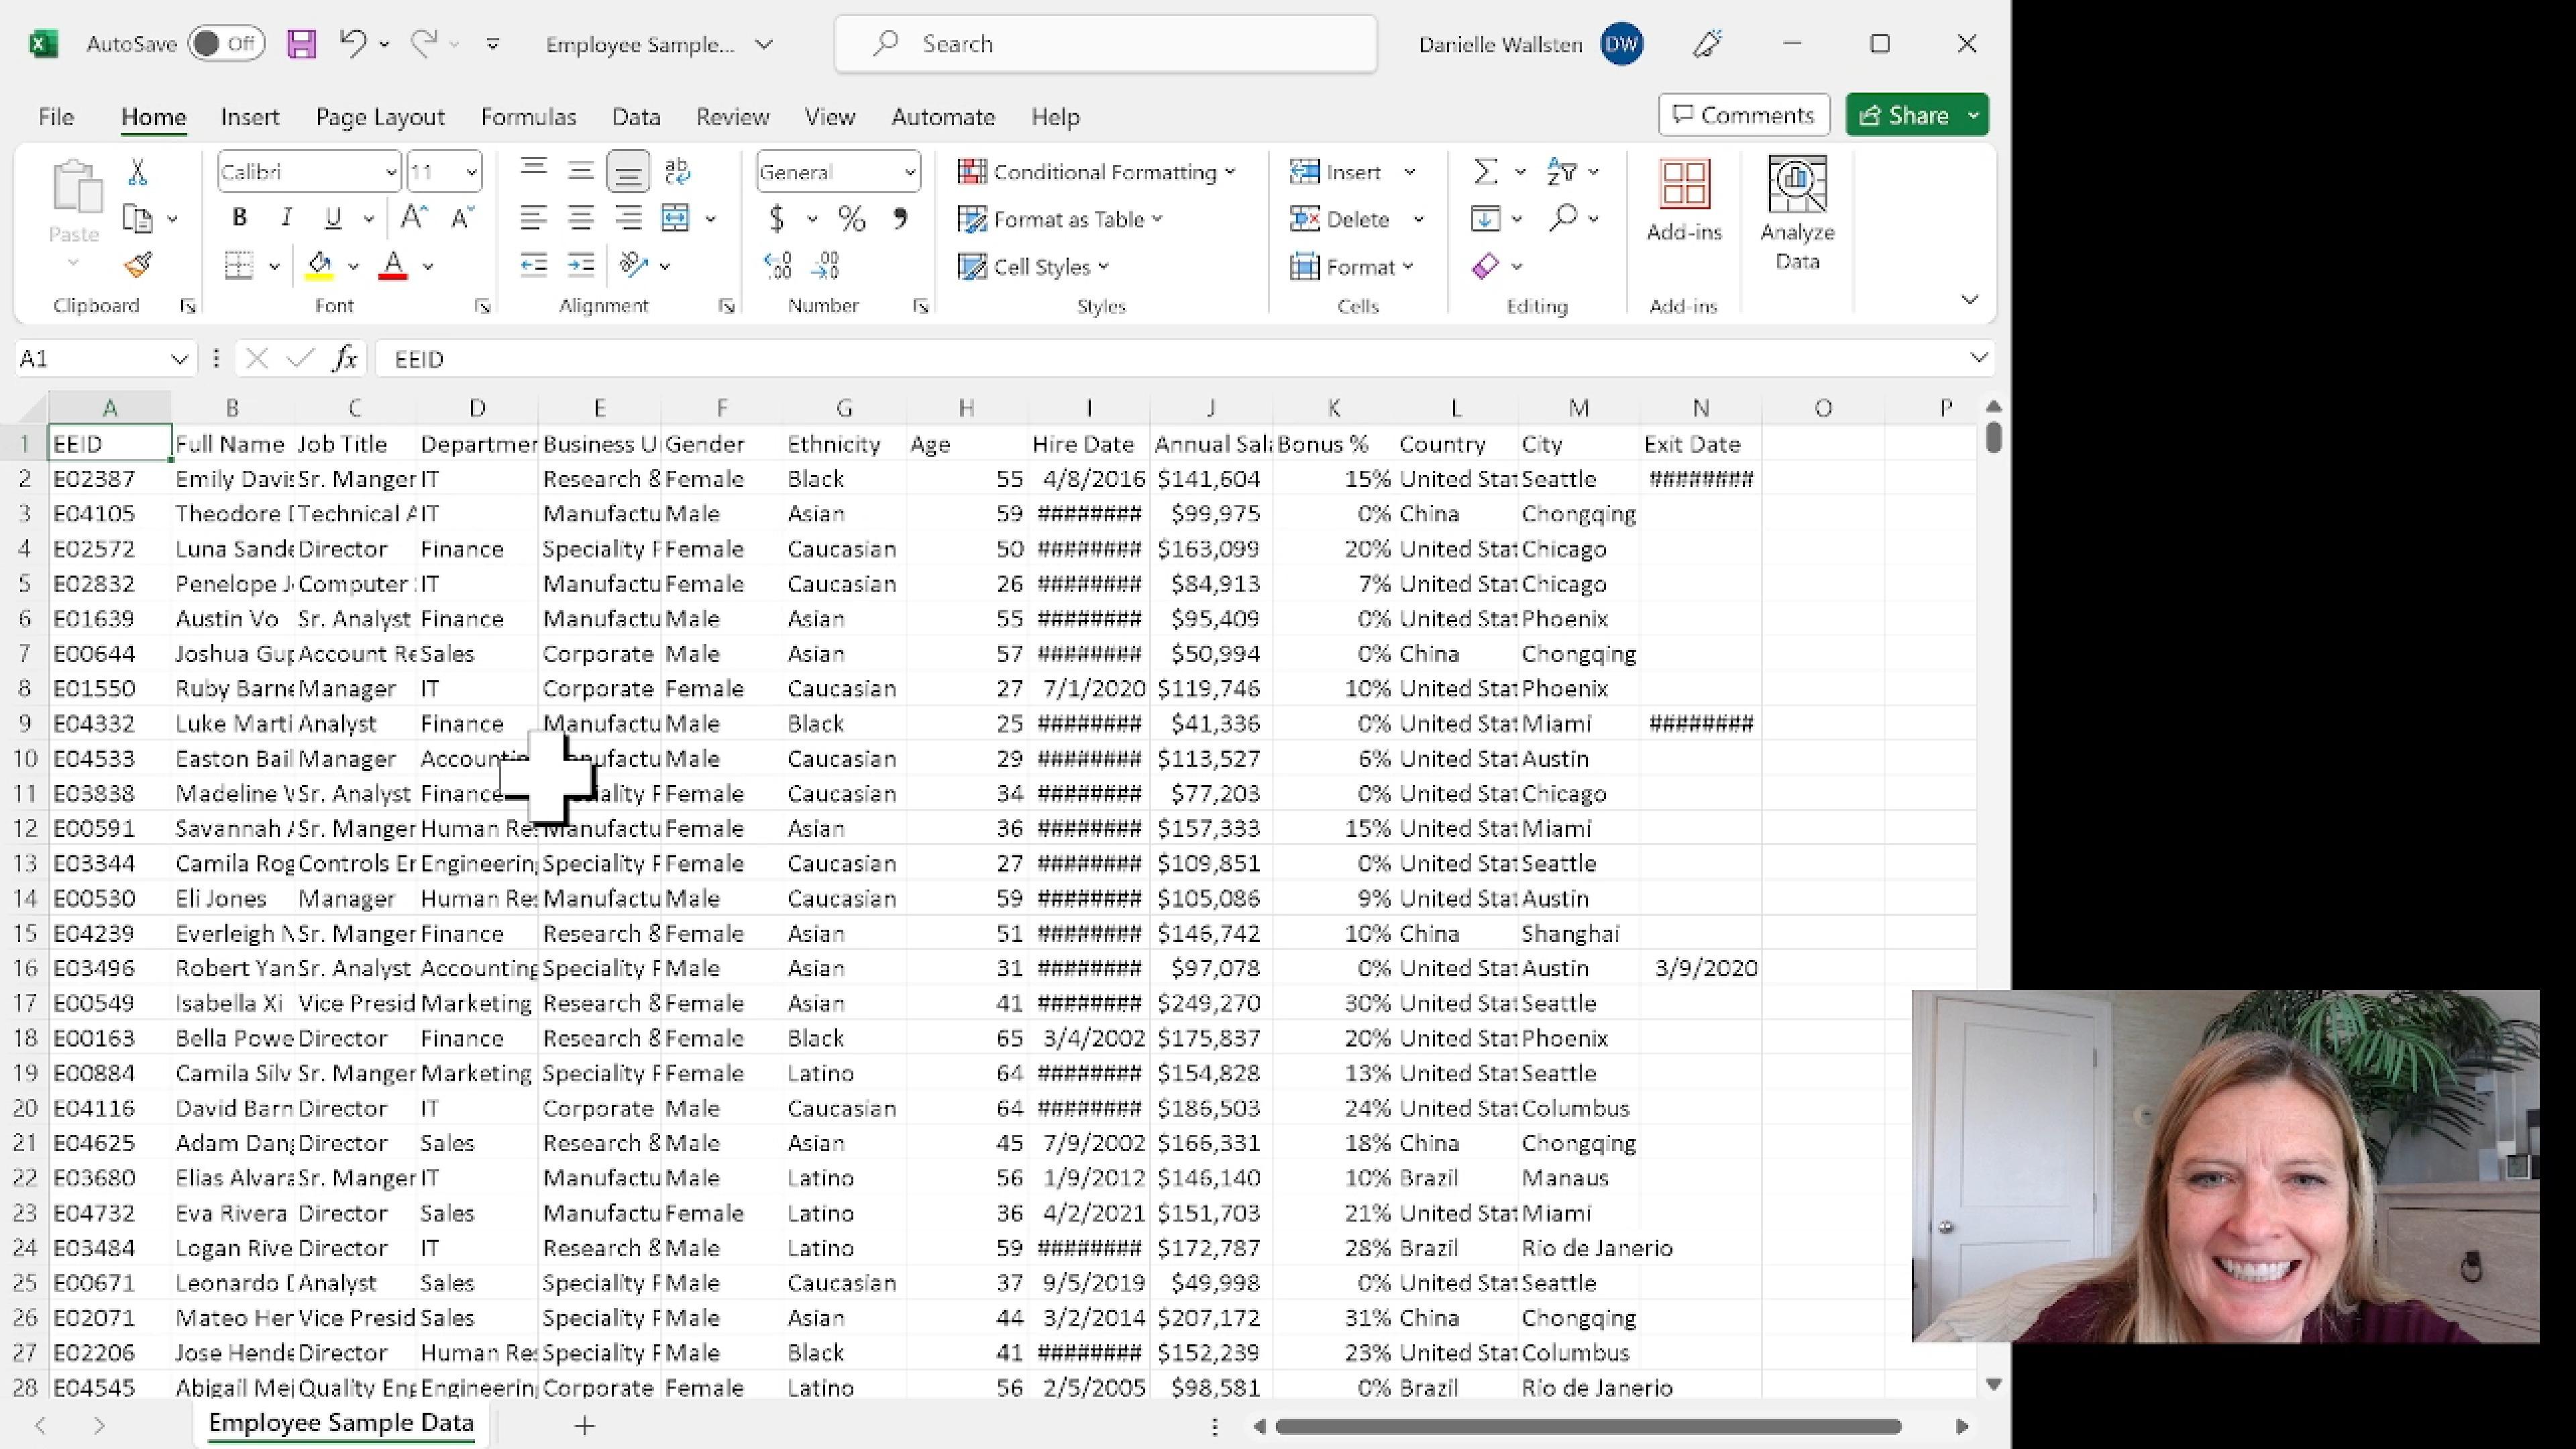 Microsoft Excel - Use Vlookup to combine data from different sources